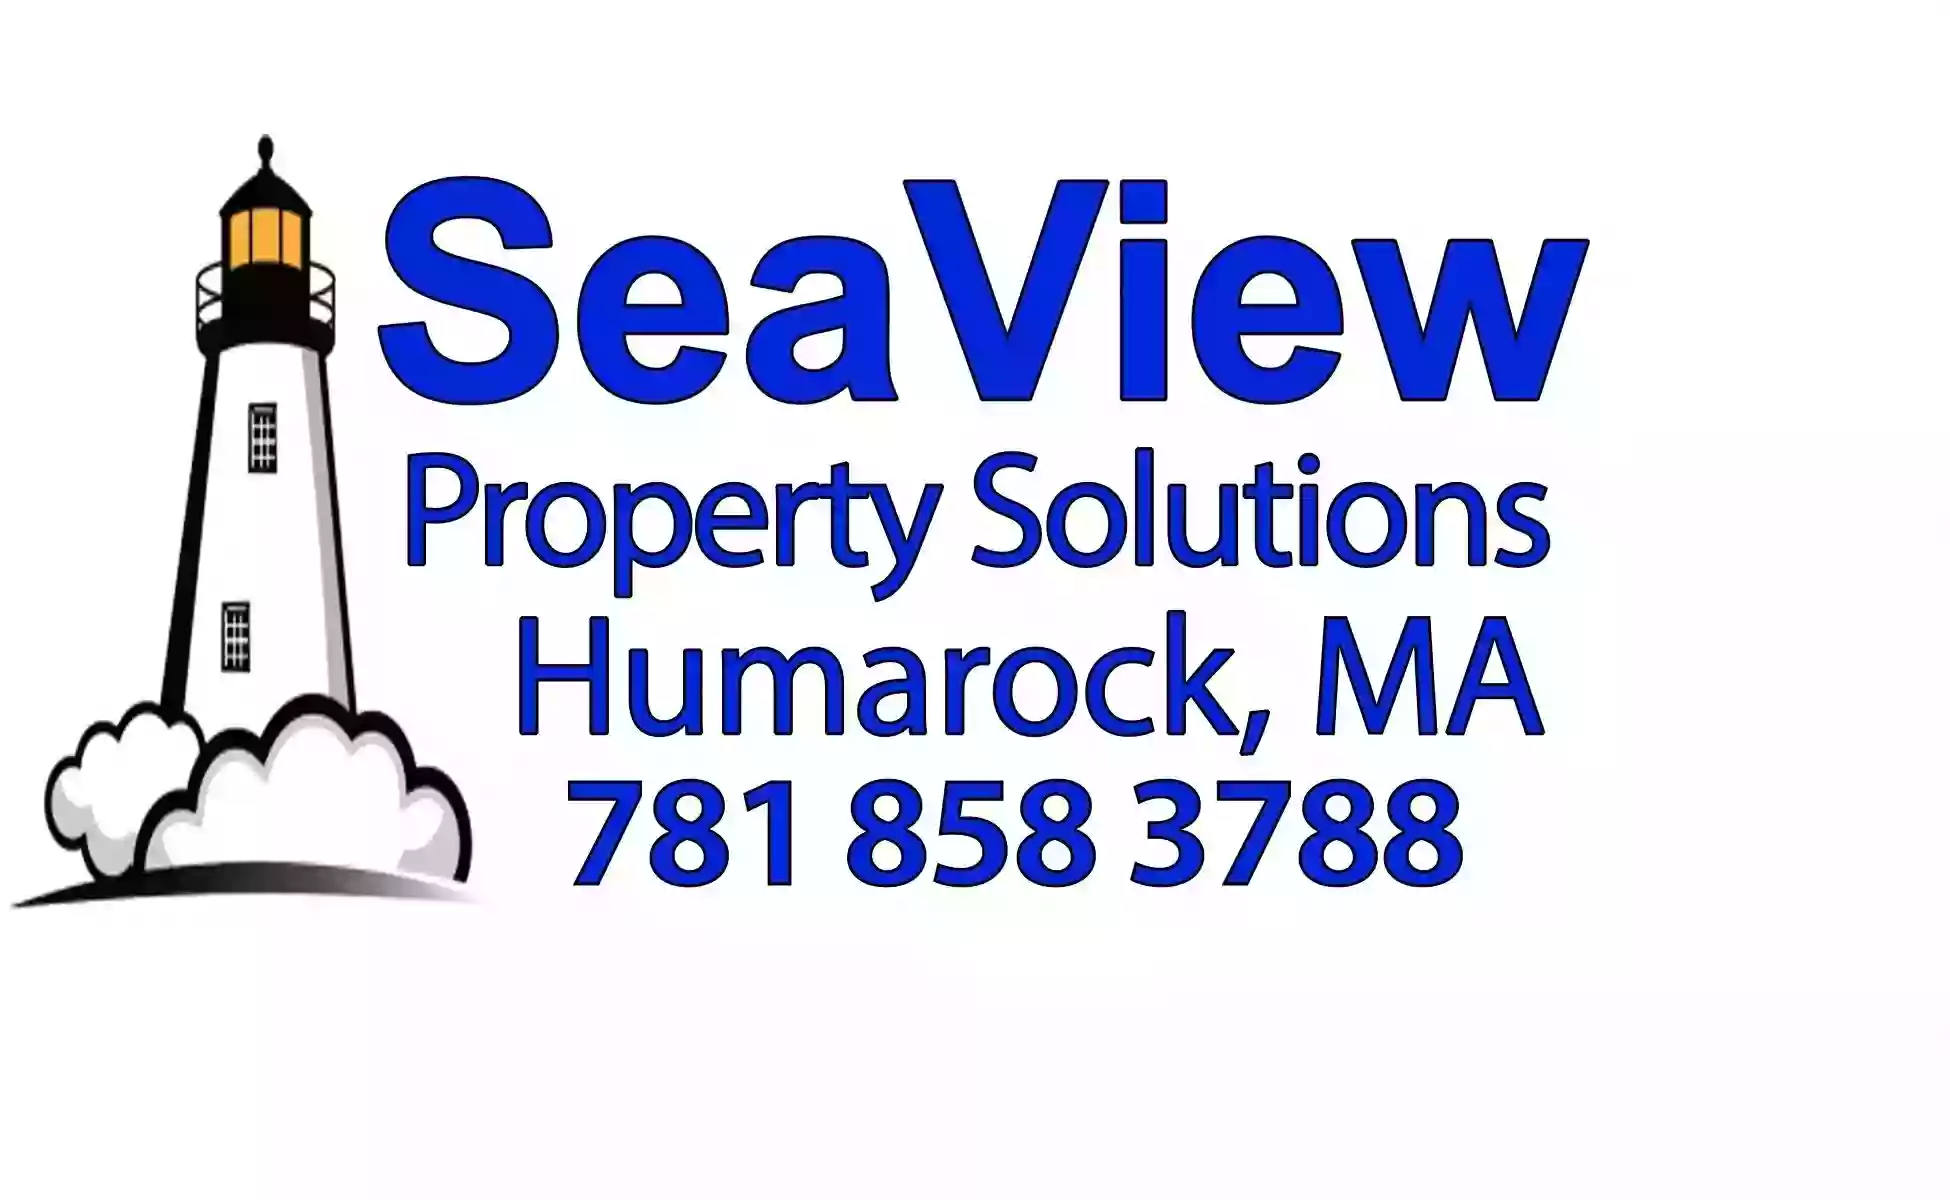 SeaView Property Solutions